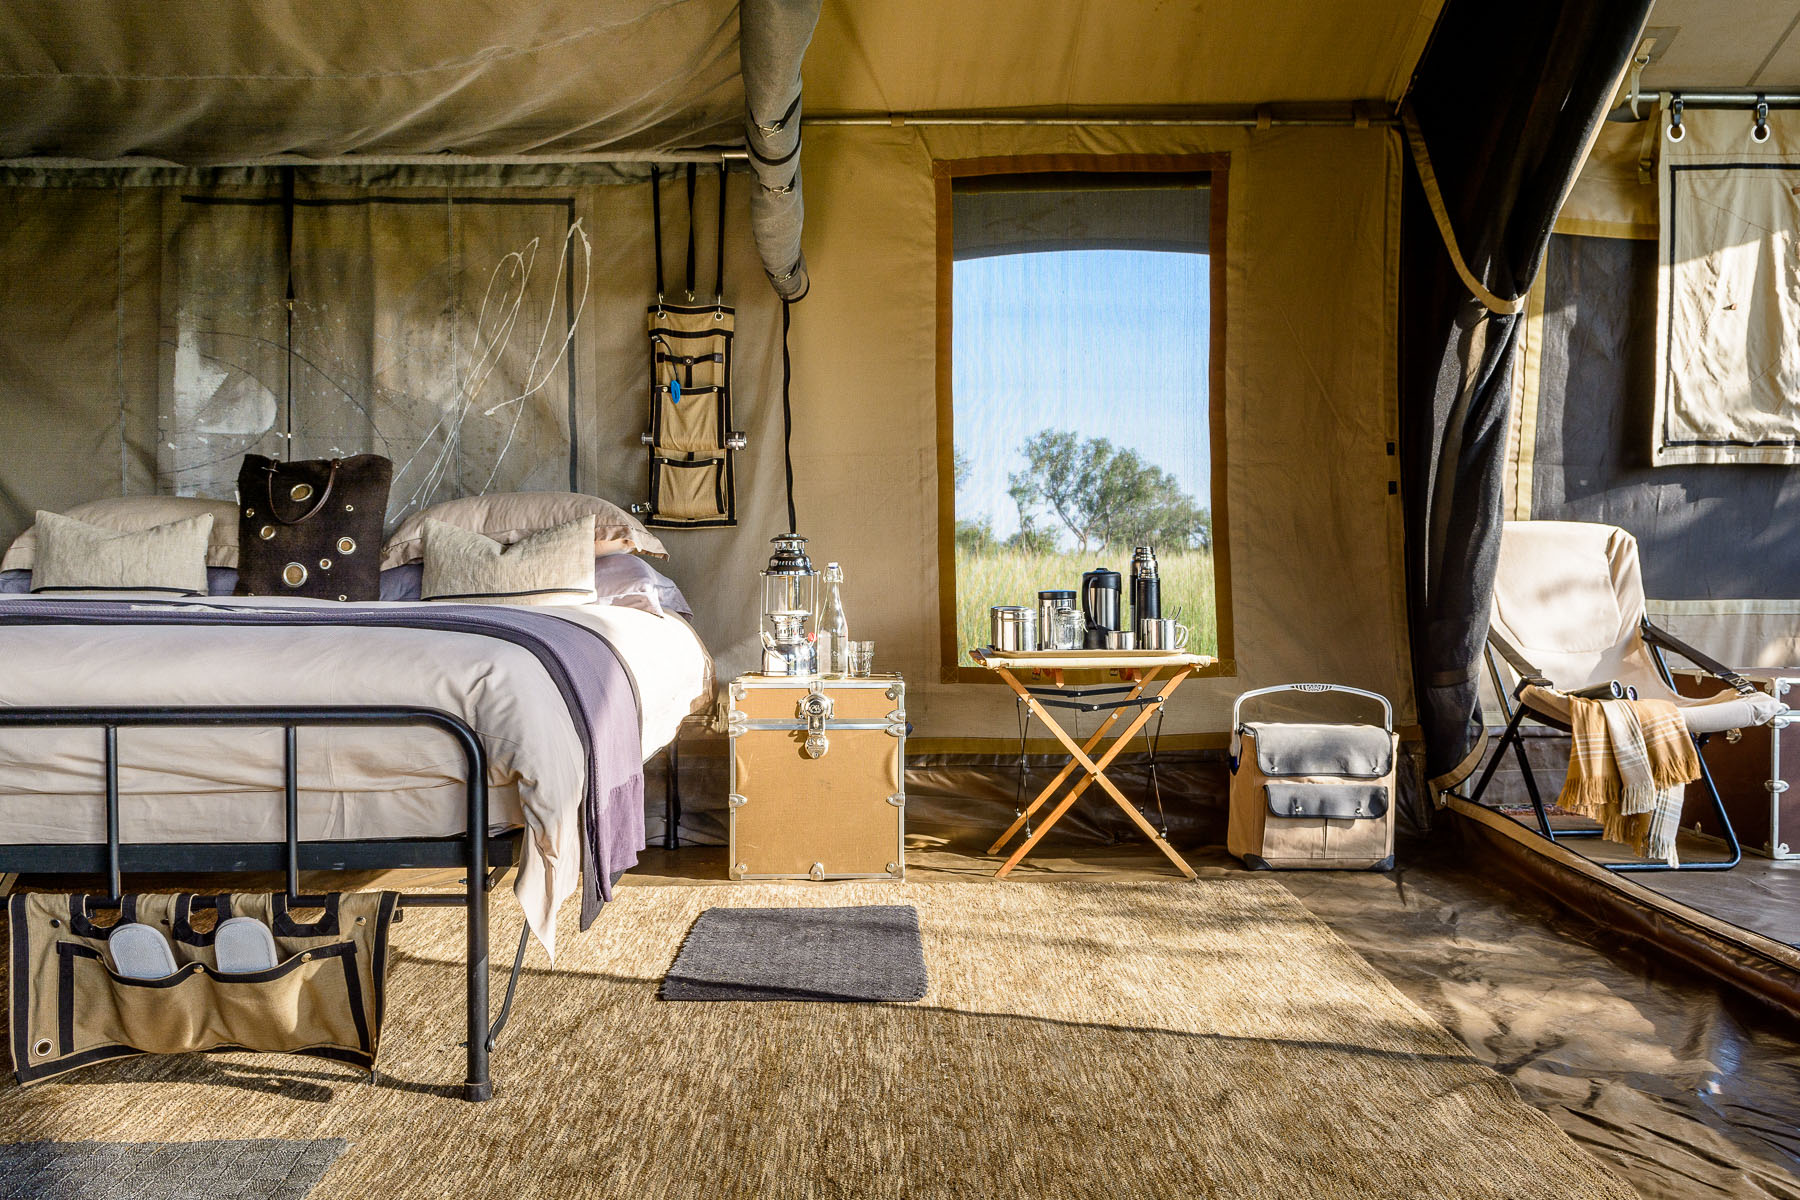 An example of the accommodations at the Singita Explore Lodge